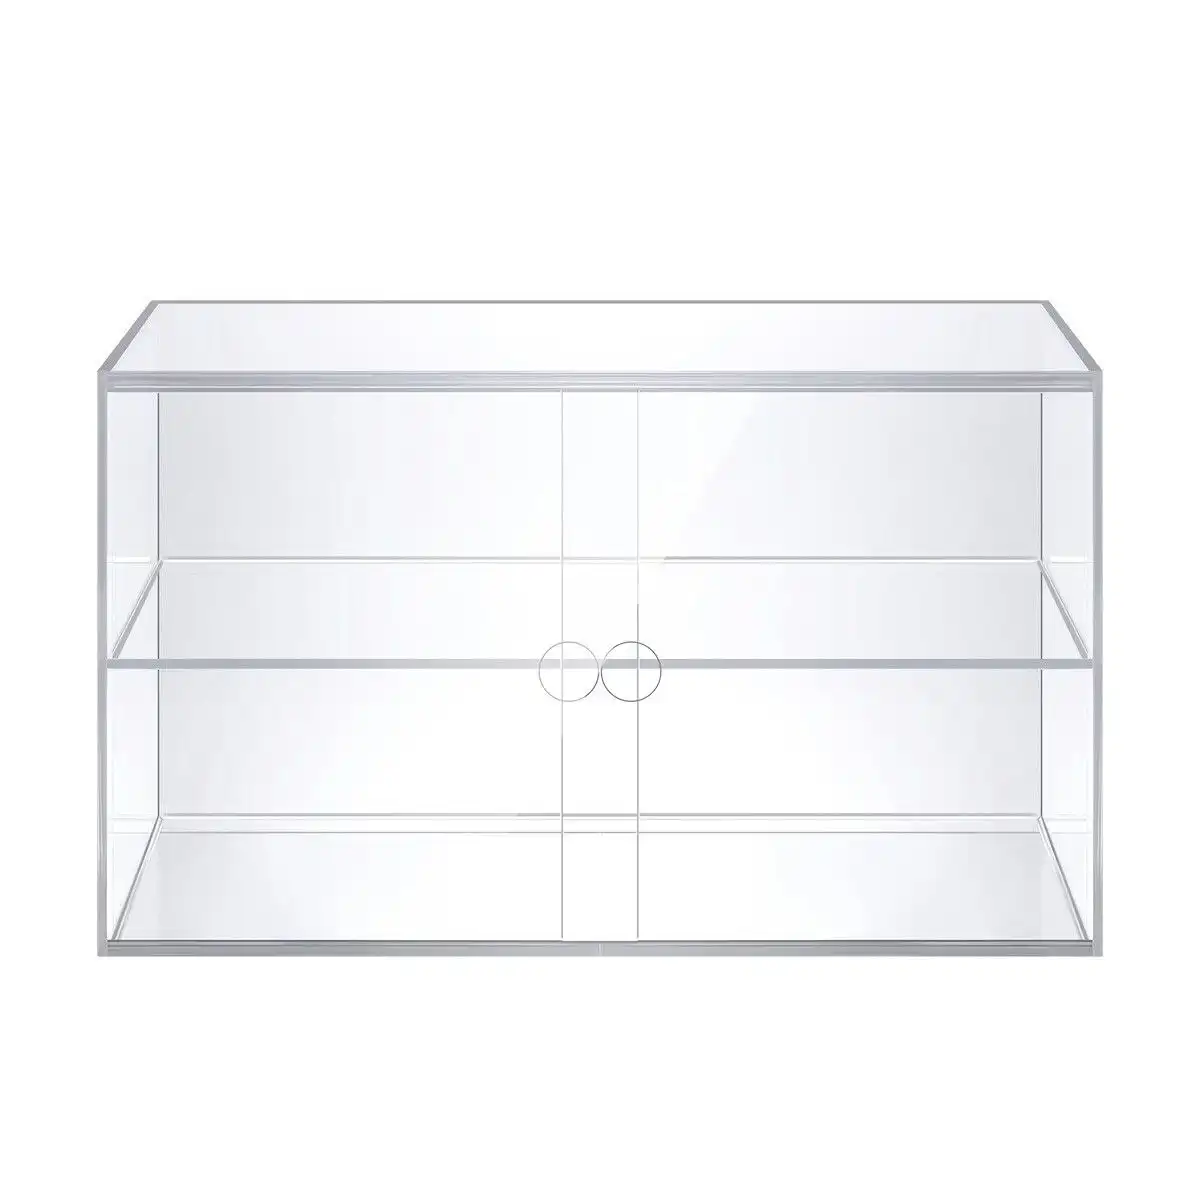 Ausway 2 Tier Cupcake Cabinet Display Shelf Unit Acrylic Cake Bakery Case Stand Model Donut Pastry Toy Showcase 5mm Thick Transparent